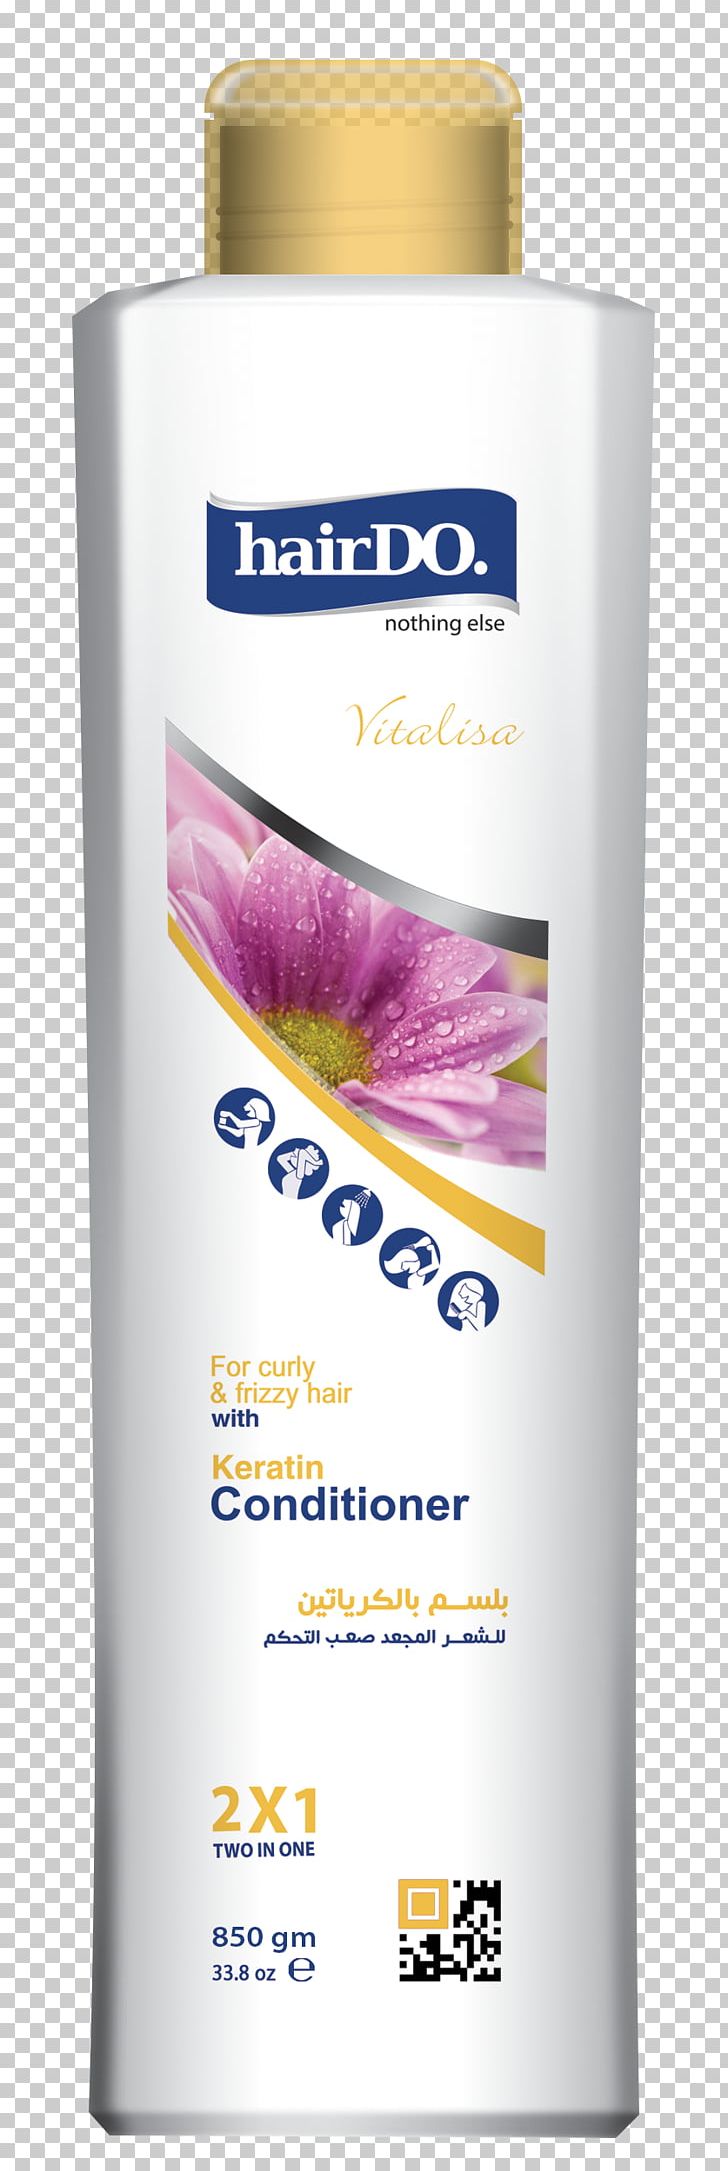 Lotion Cosmeceutical Cosmetics Skin Care Egypt PNG, Clipart, Business, Cosmeceutical, Cosmetics, Egypt, Egyptians Free PNG Download